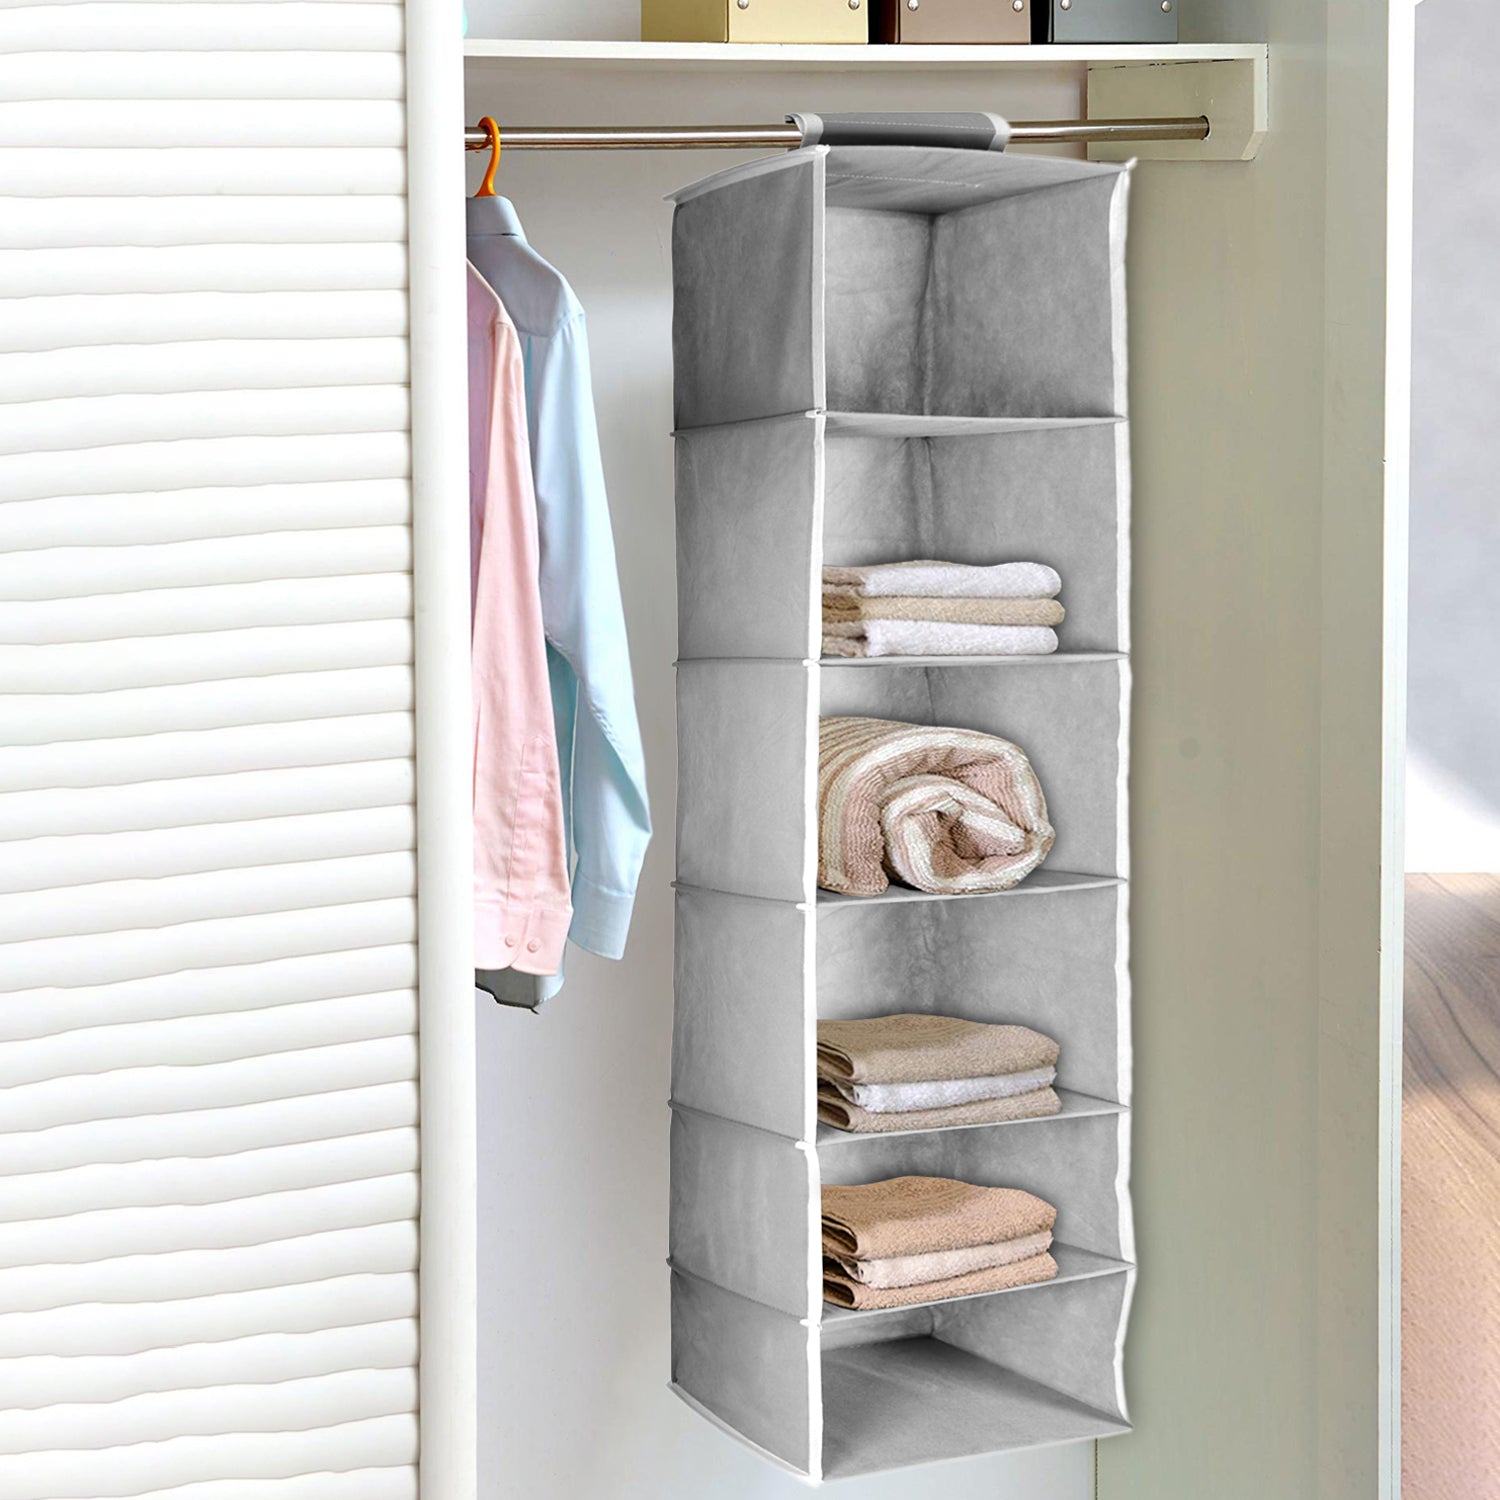 6370  6 Shelf Hanging Closet Organizer, Space Saver, Sweater & Clothing Shelves, Breathable Material Keeps Away Dust & Odors, DeoDap